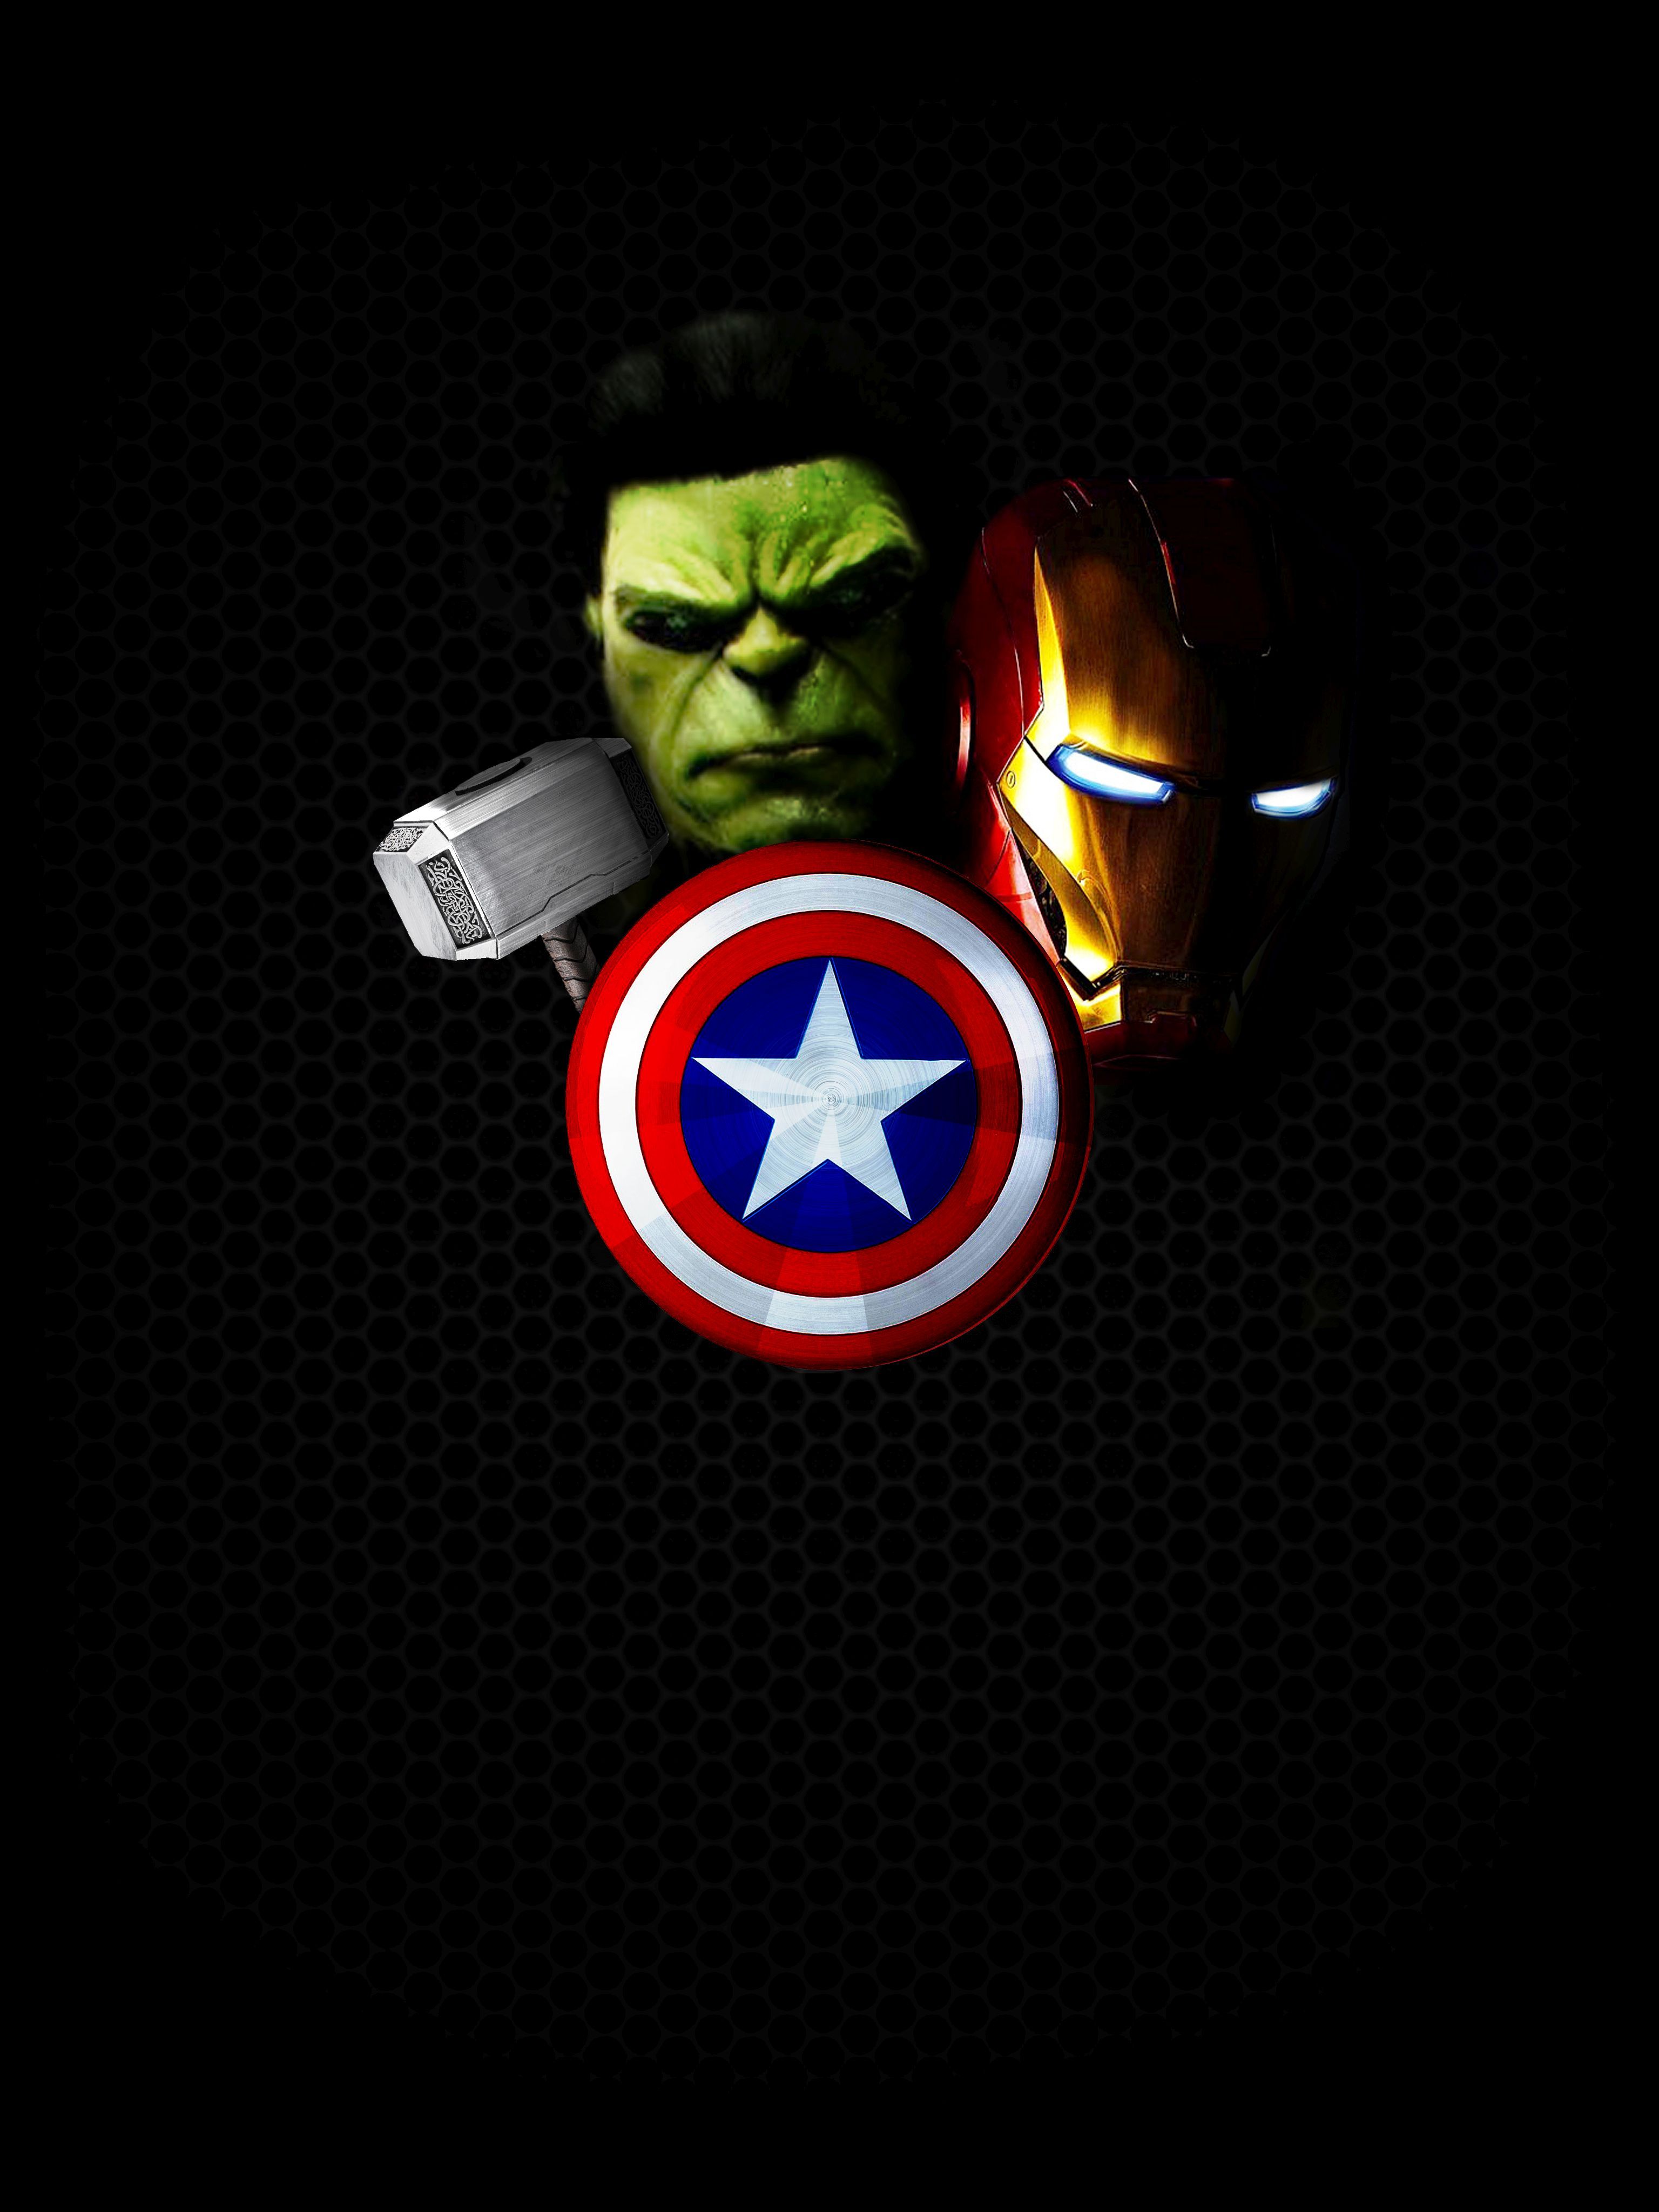 Avengers Wallpaper for mobile phone, tablet, desktop computer and other devices HD and 4K wallpa. Marvel wallpaper hd, Avengers wallpaper, Marvel iphone wallpaper